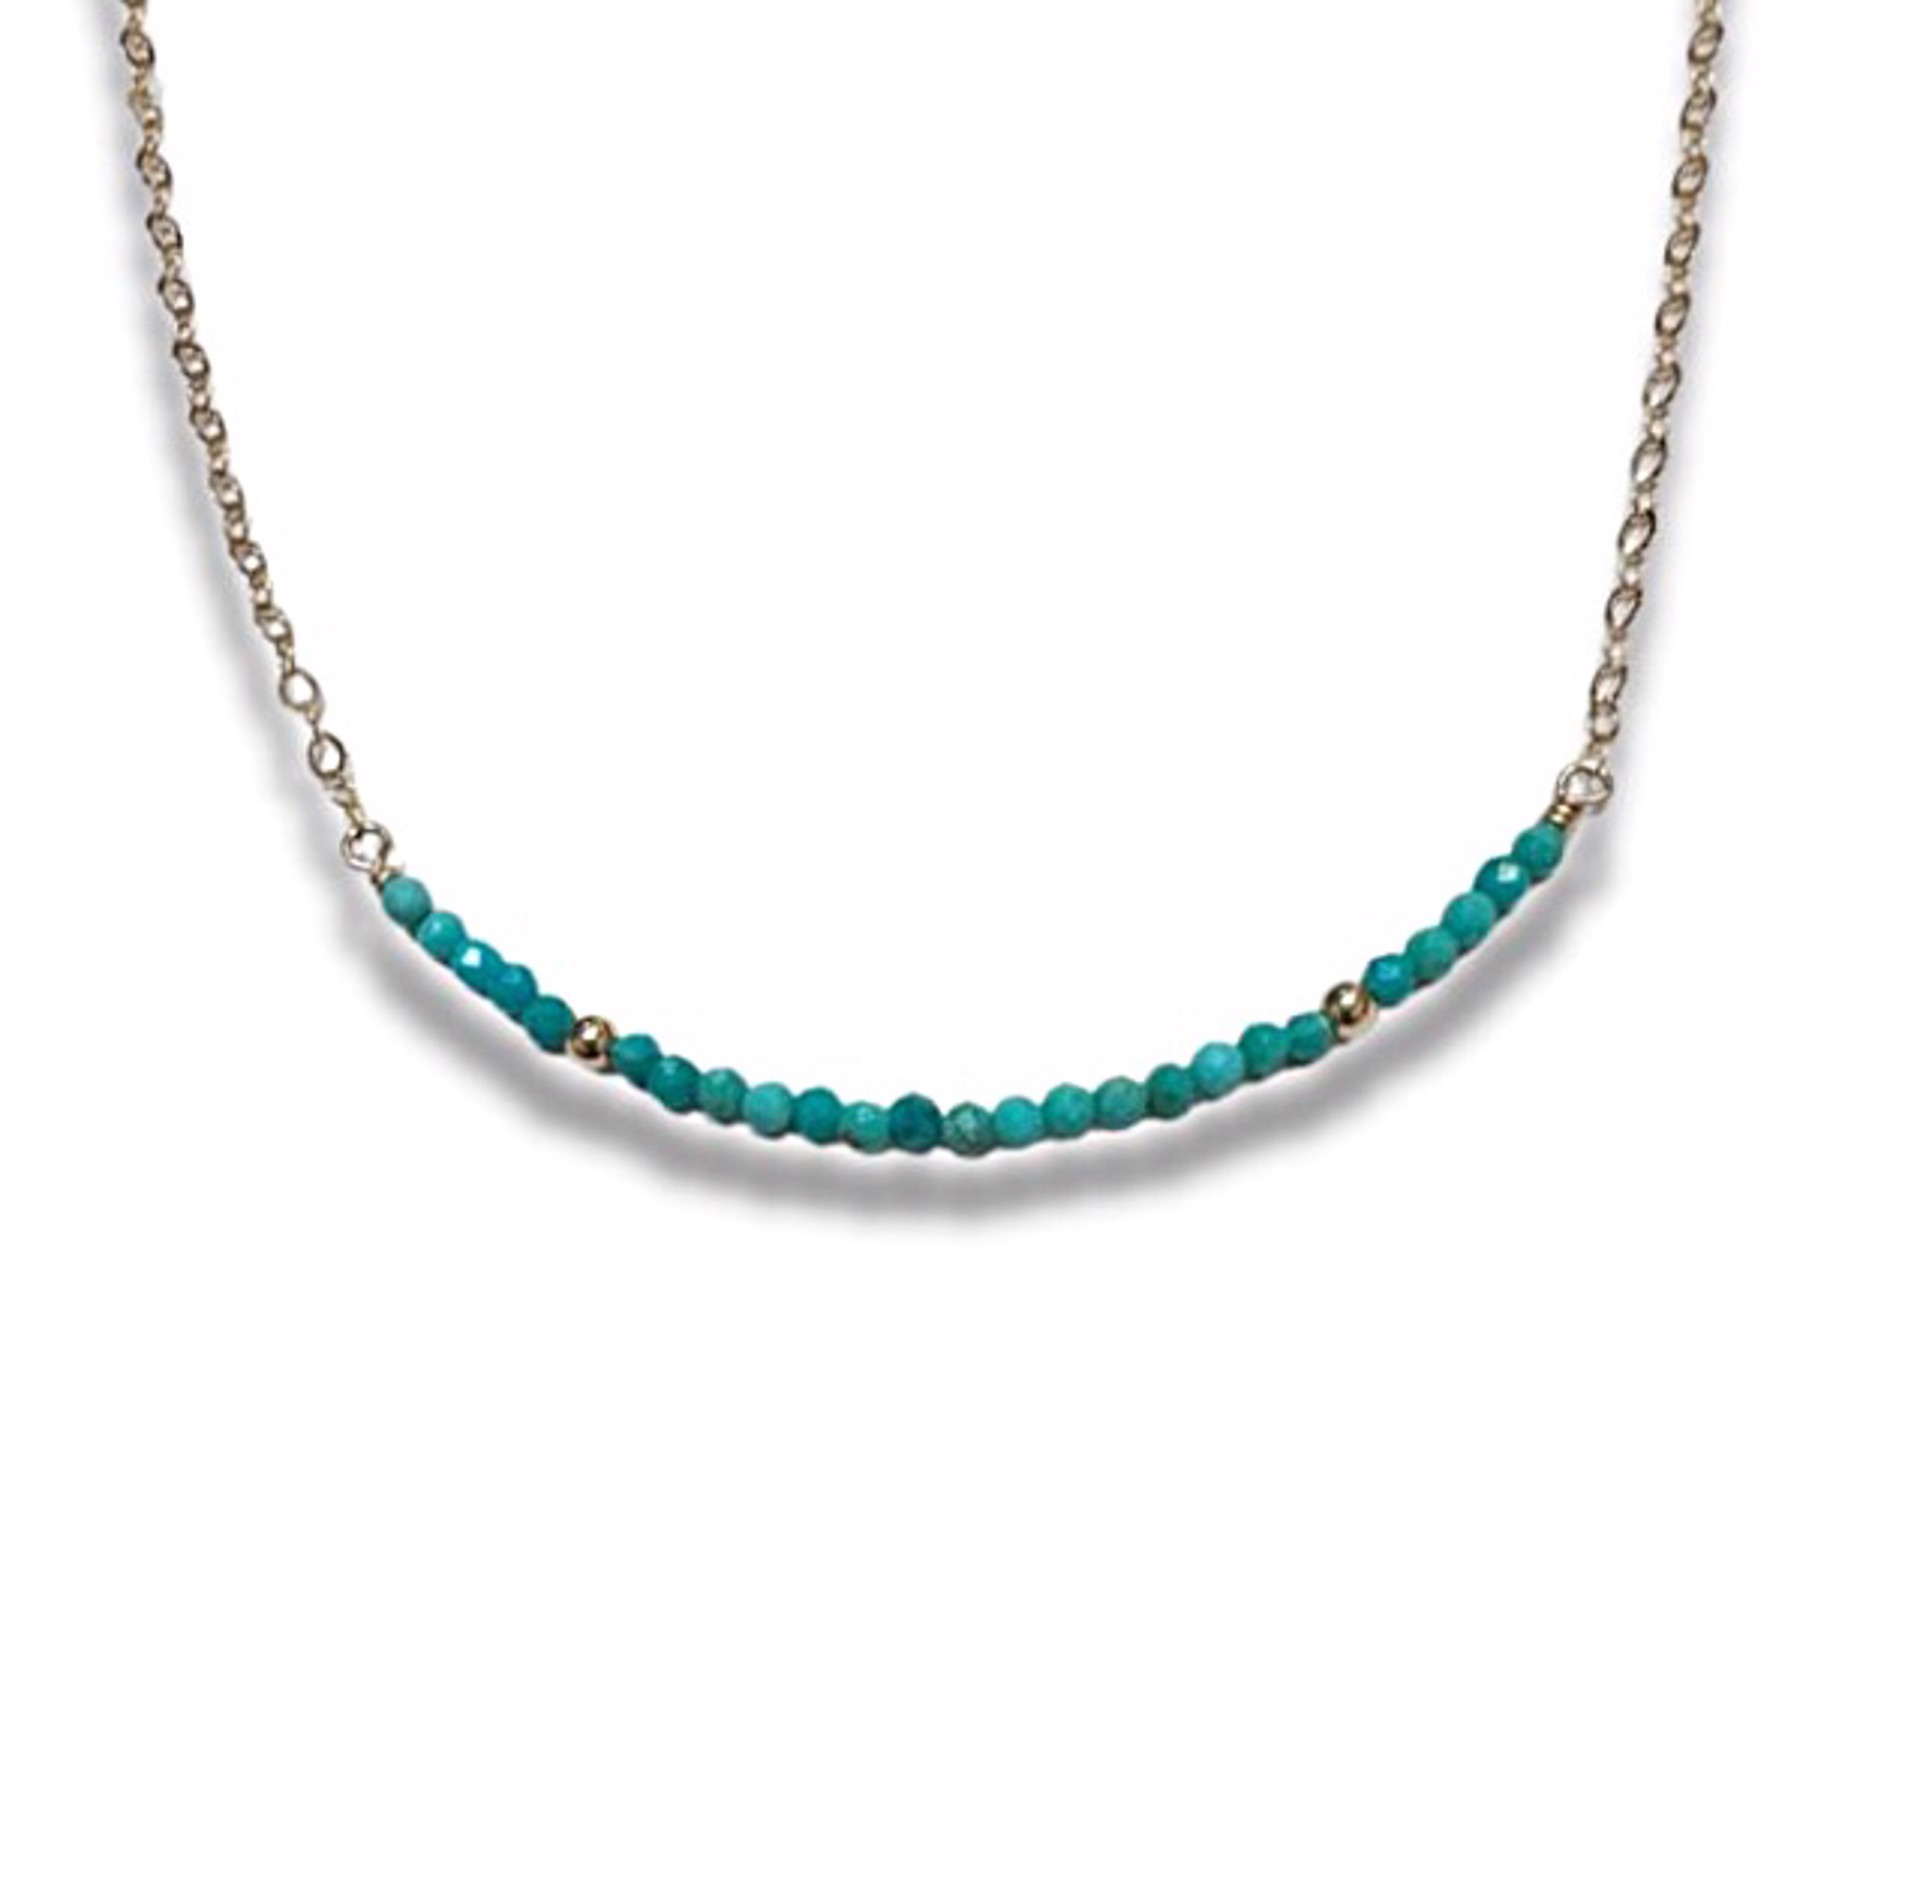 Necklace - 14K Gold Filled with Sleeping Beauty Turquose Bar by Julia Balestracci